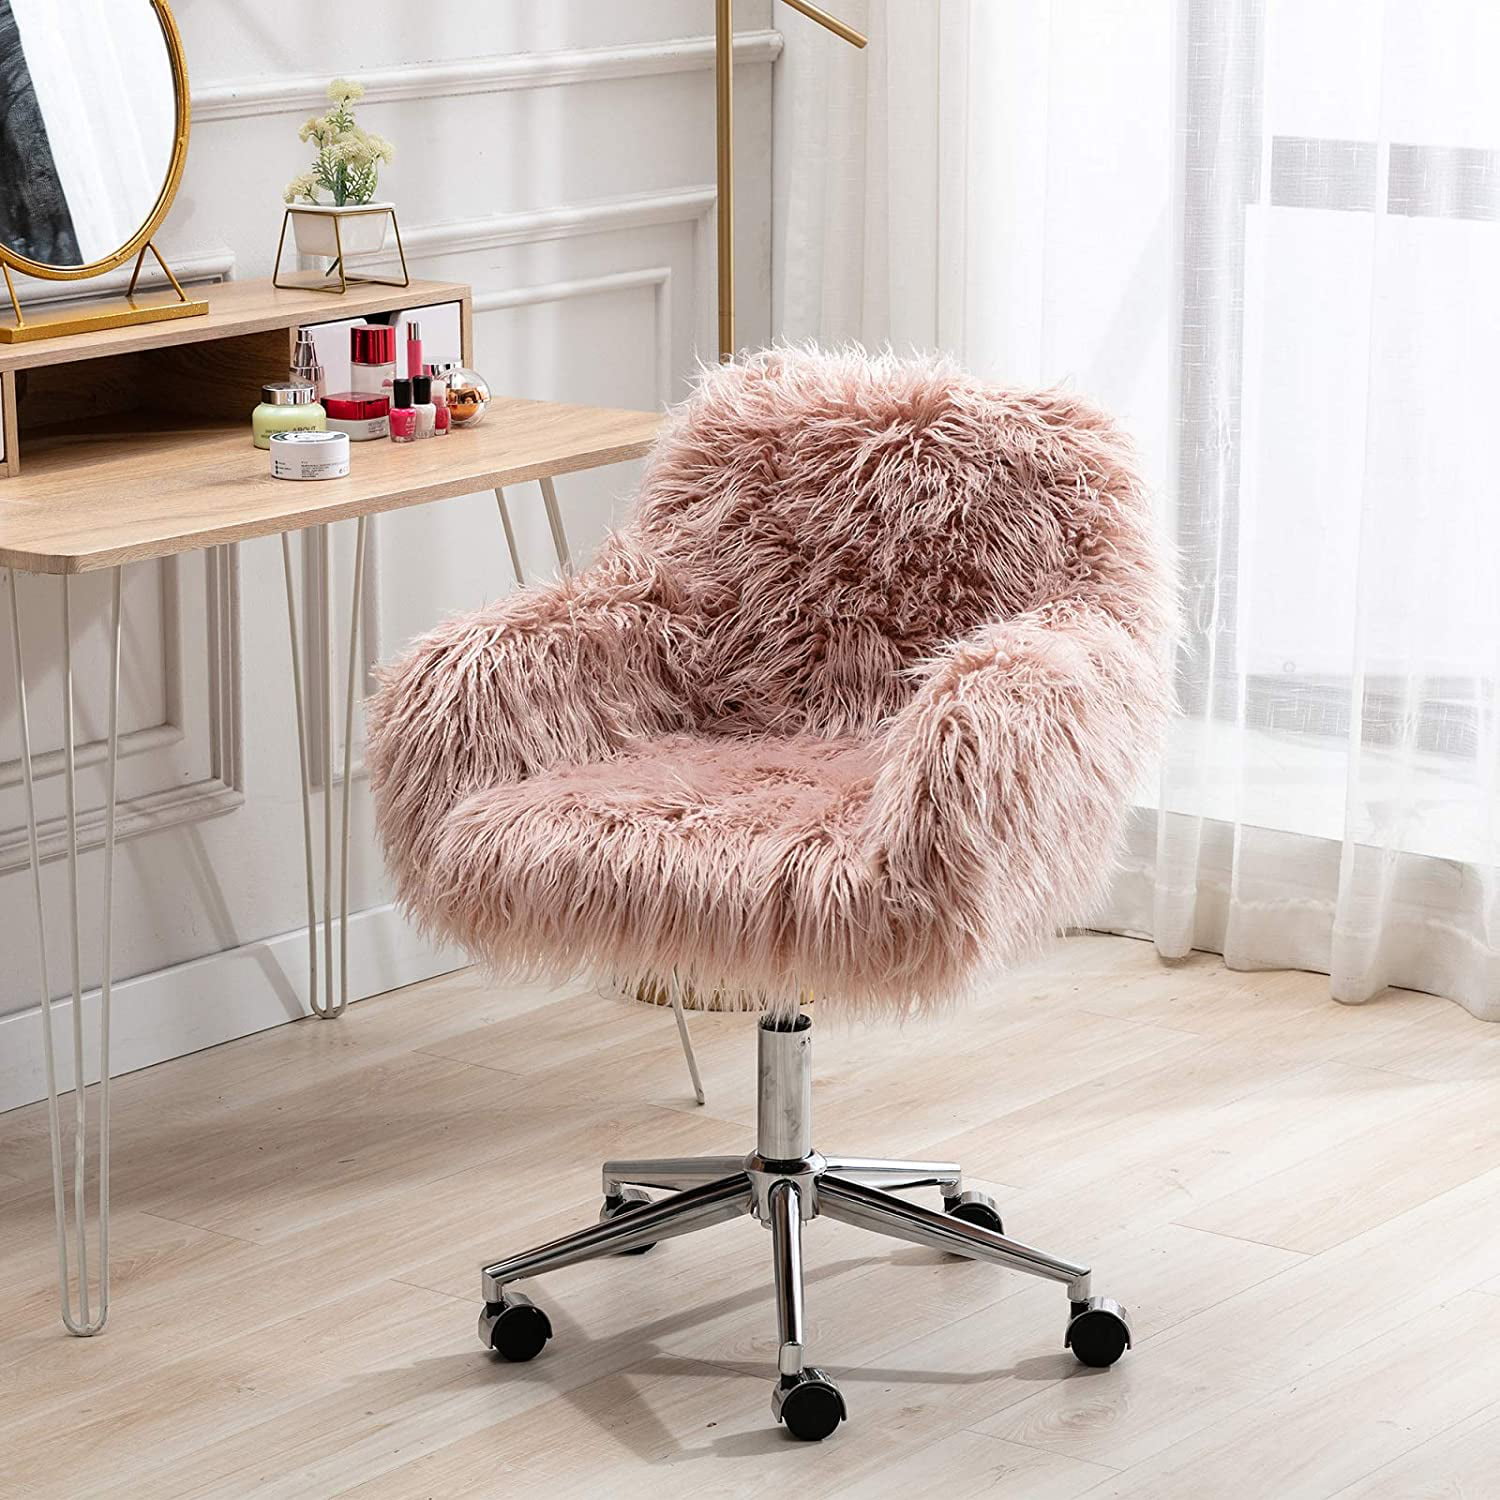 Stylish Soft Fuzzy Kids Desk Chair Swivel Mid Back Task Rolling Chair Adjustable Children Study Computer Chair Pink Rabbit Ears Child Activity Chair with Casters for Home Office School